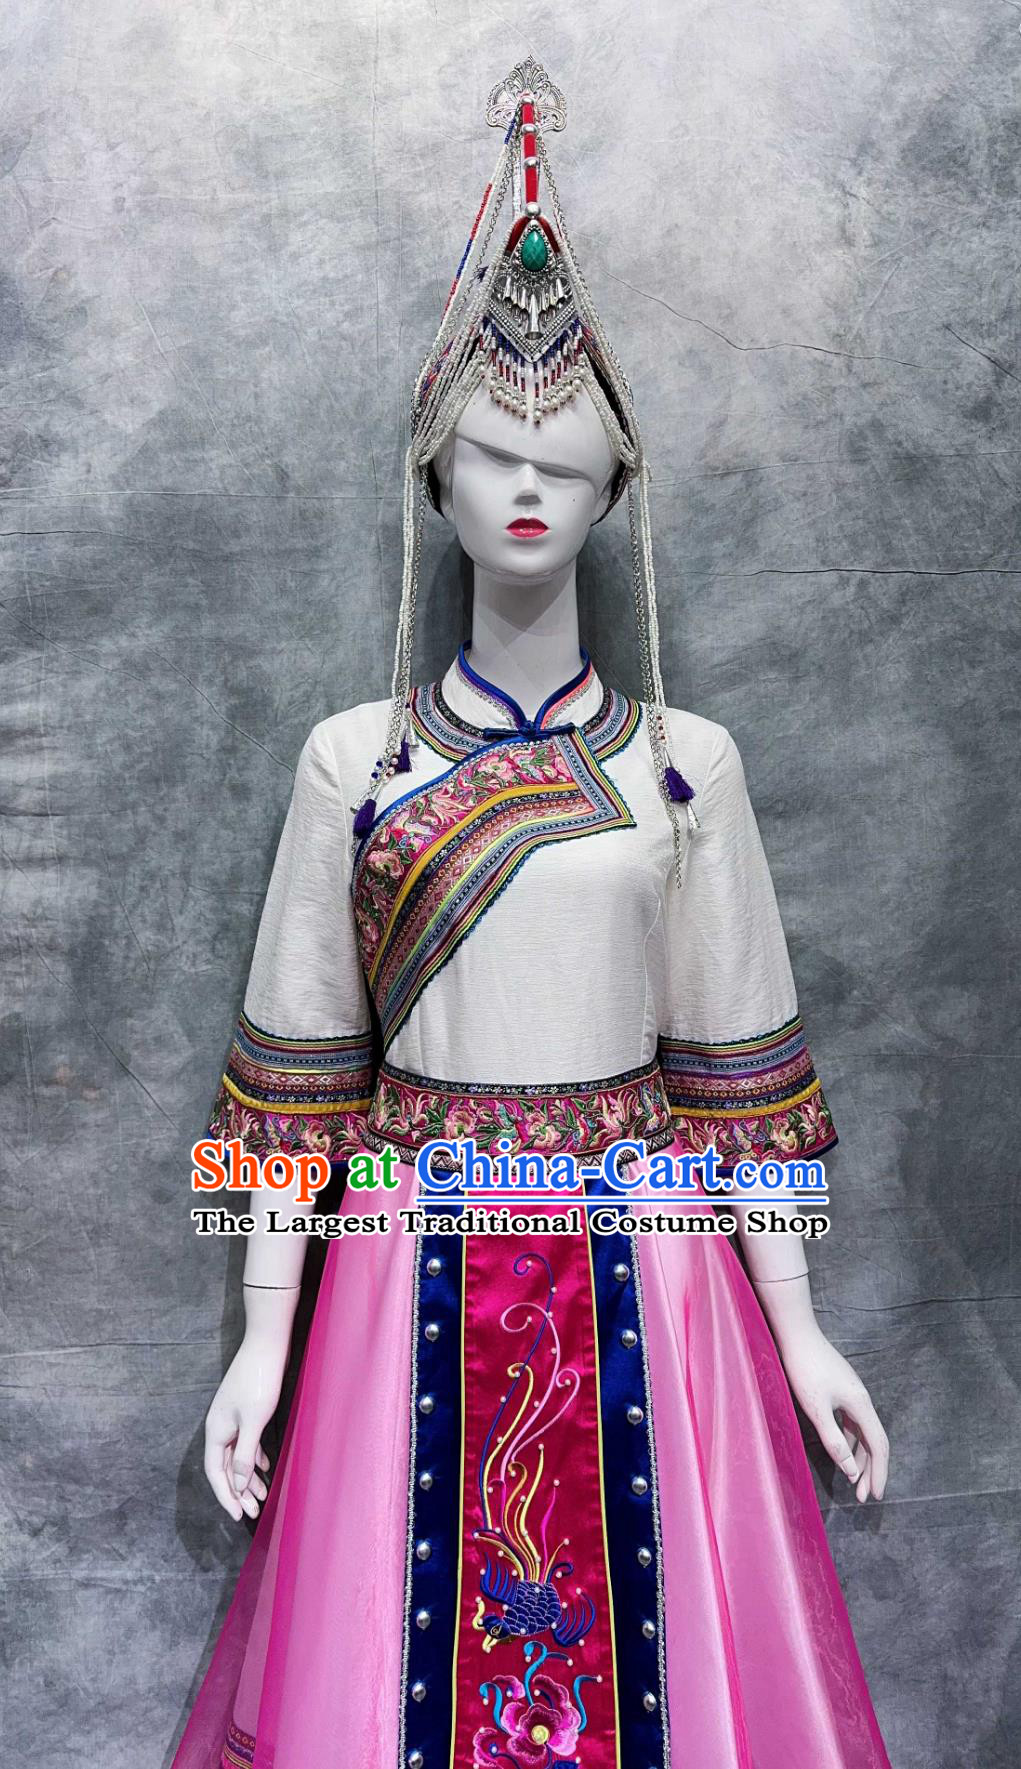 Chinese She Ethnic Woman Clothing China National Minority White Shirt and Pink Skirt March rd Stage Show Costume